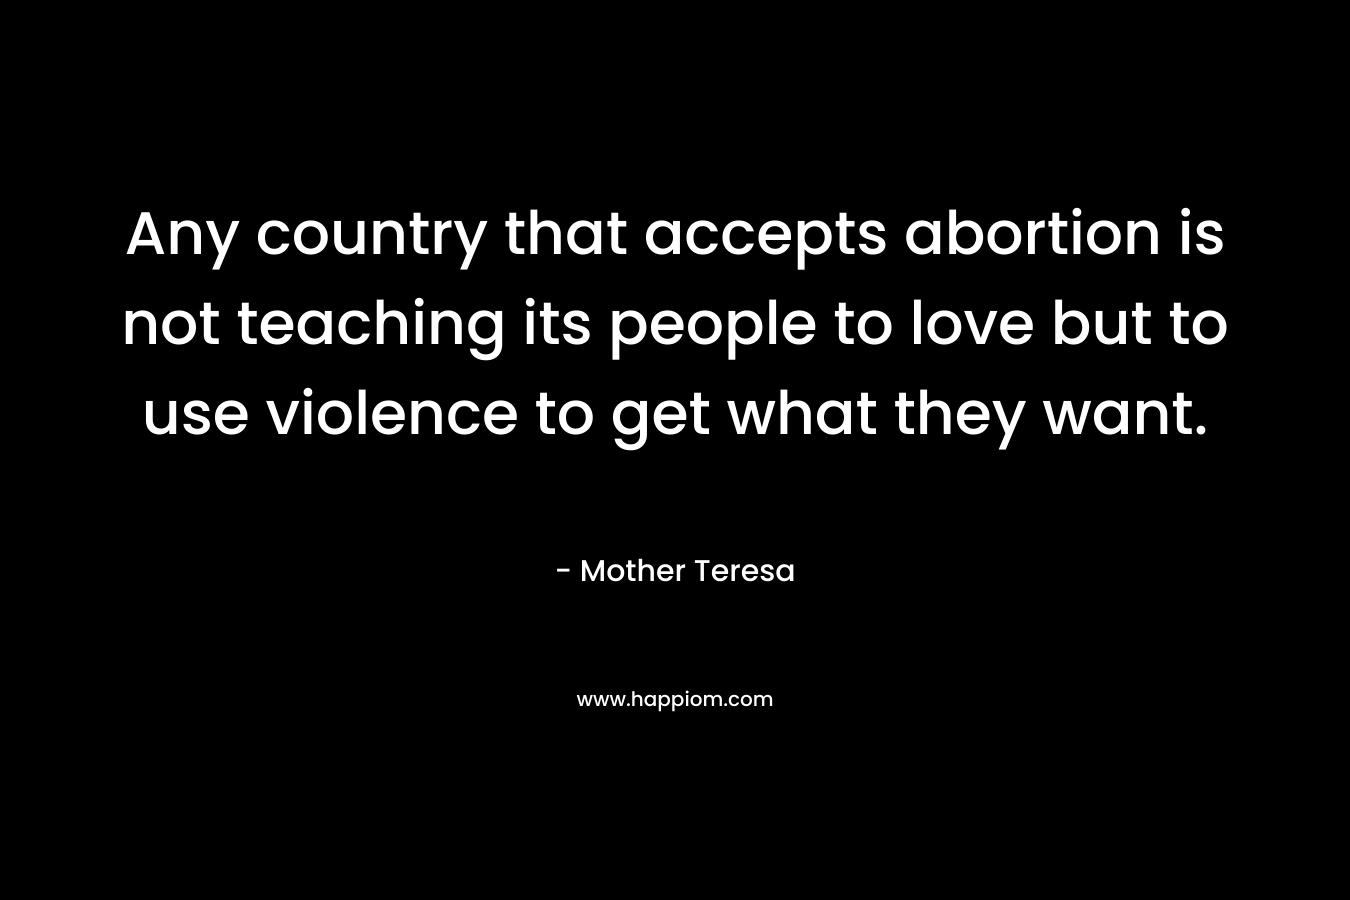 Any country that accepts abortion is not teaching its people to love but to use violence to get what they want. – Mother Teresa